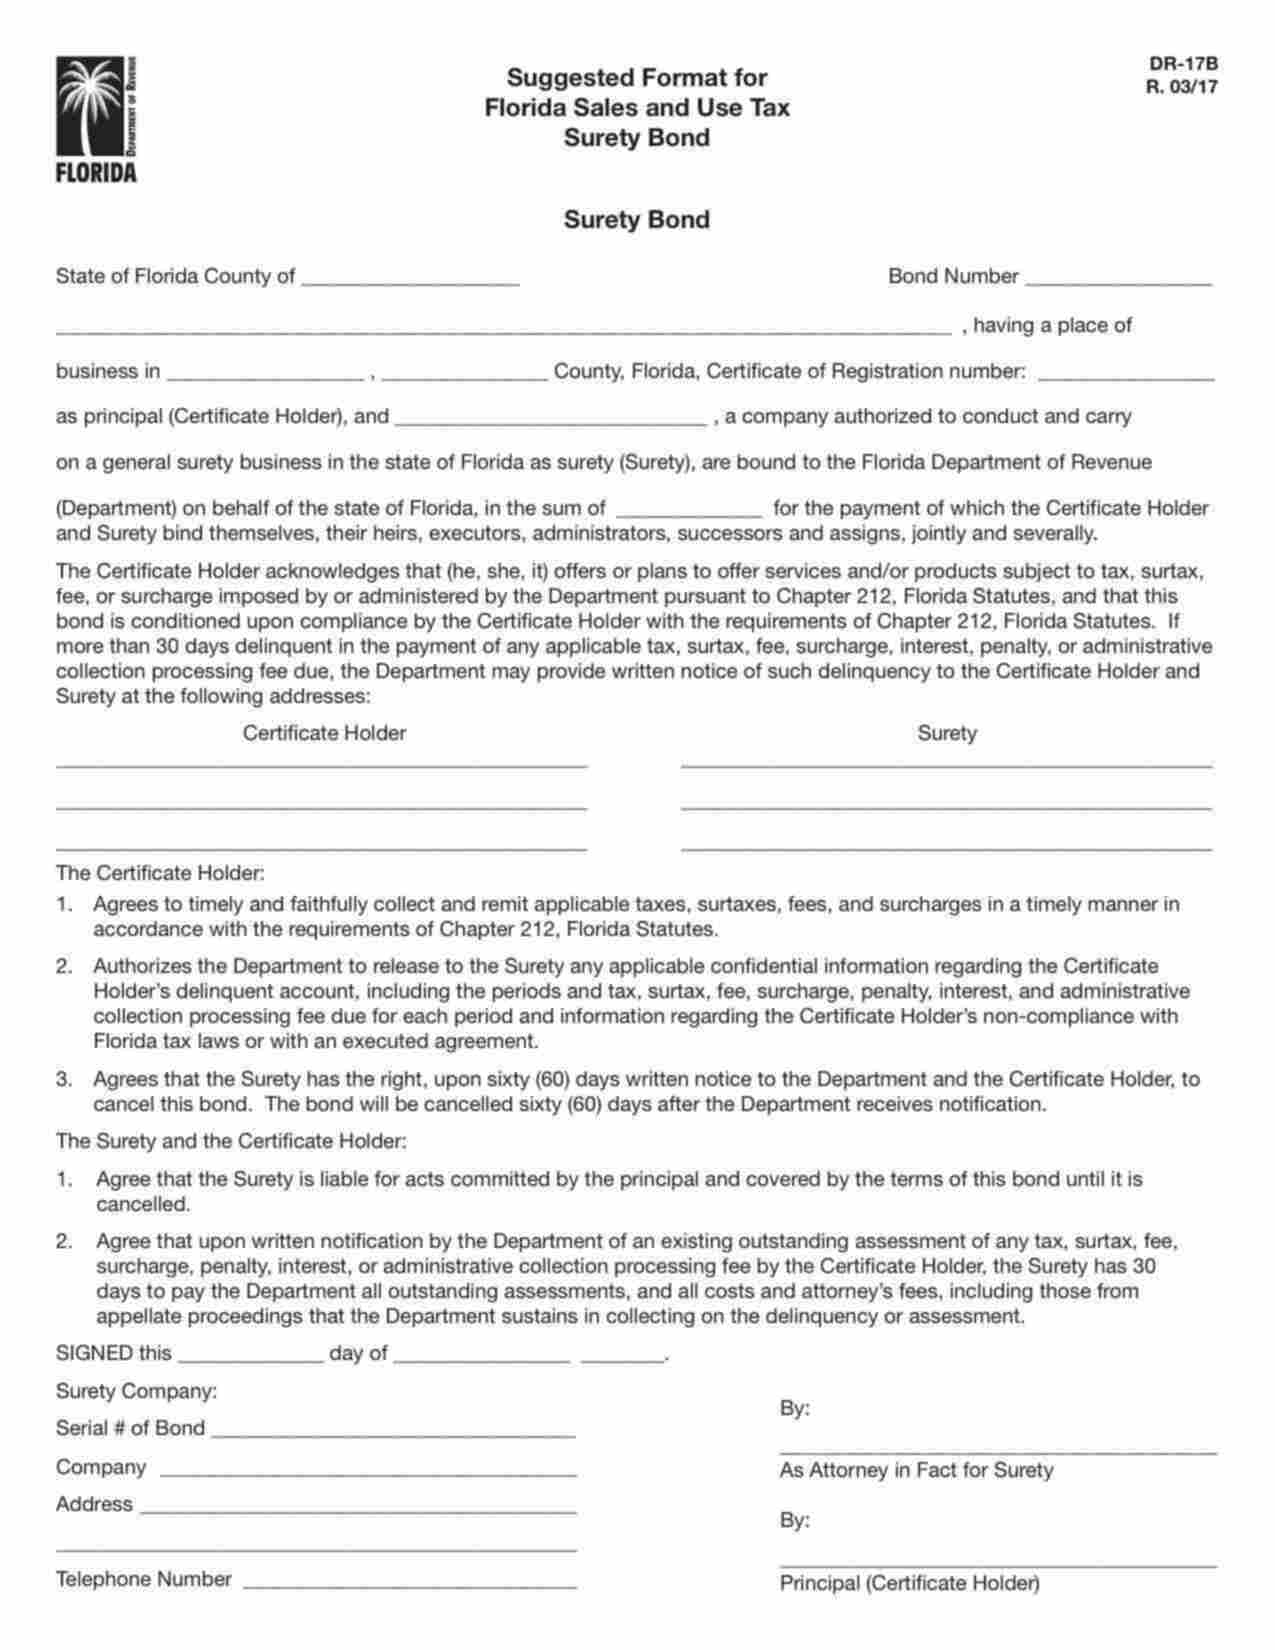 Florida Sales and Use Tax Bond Form